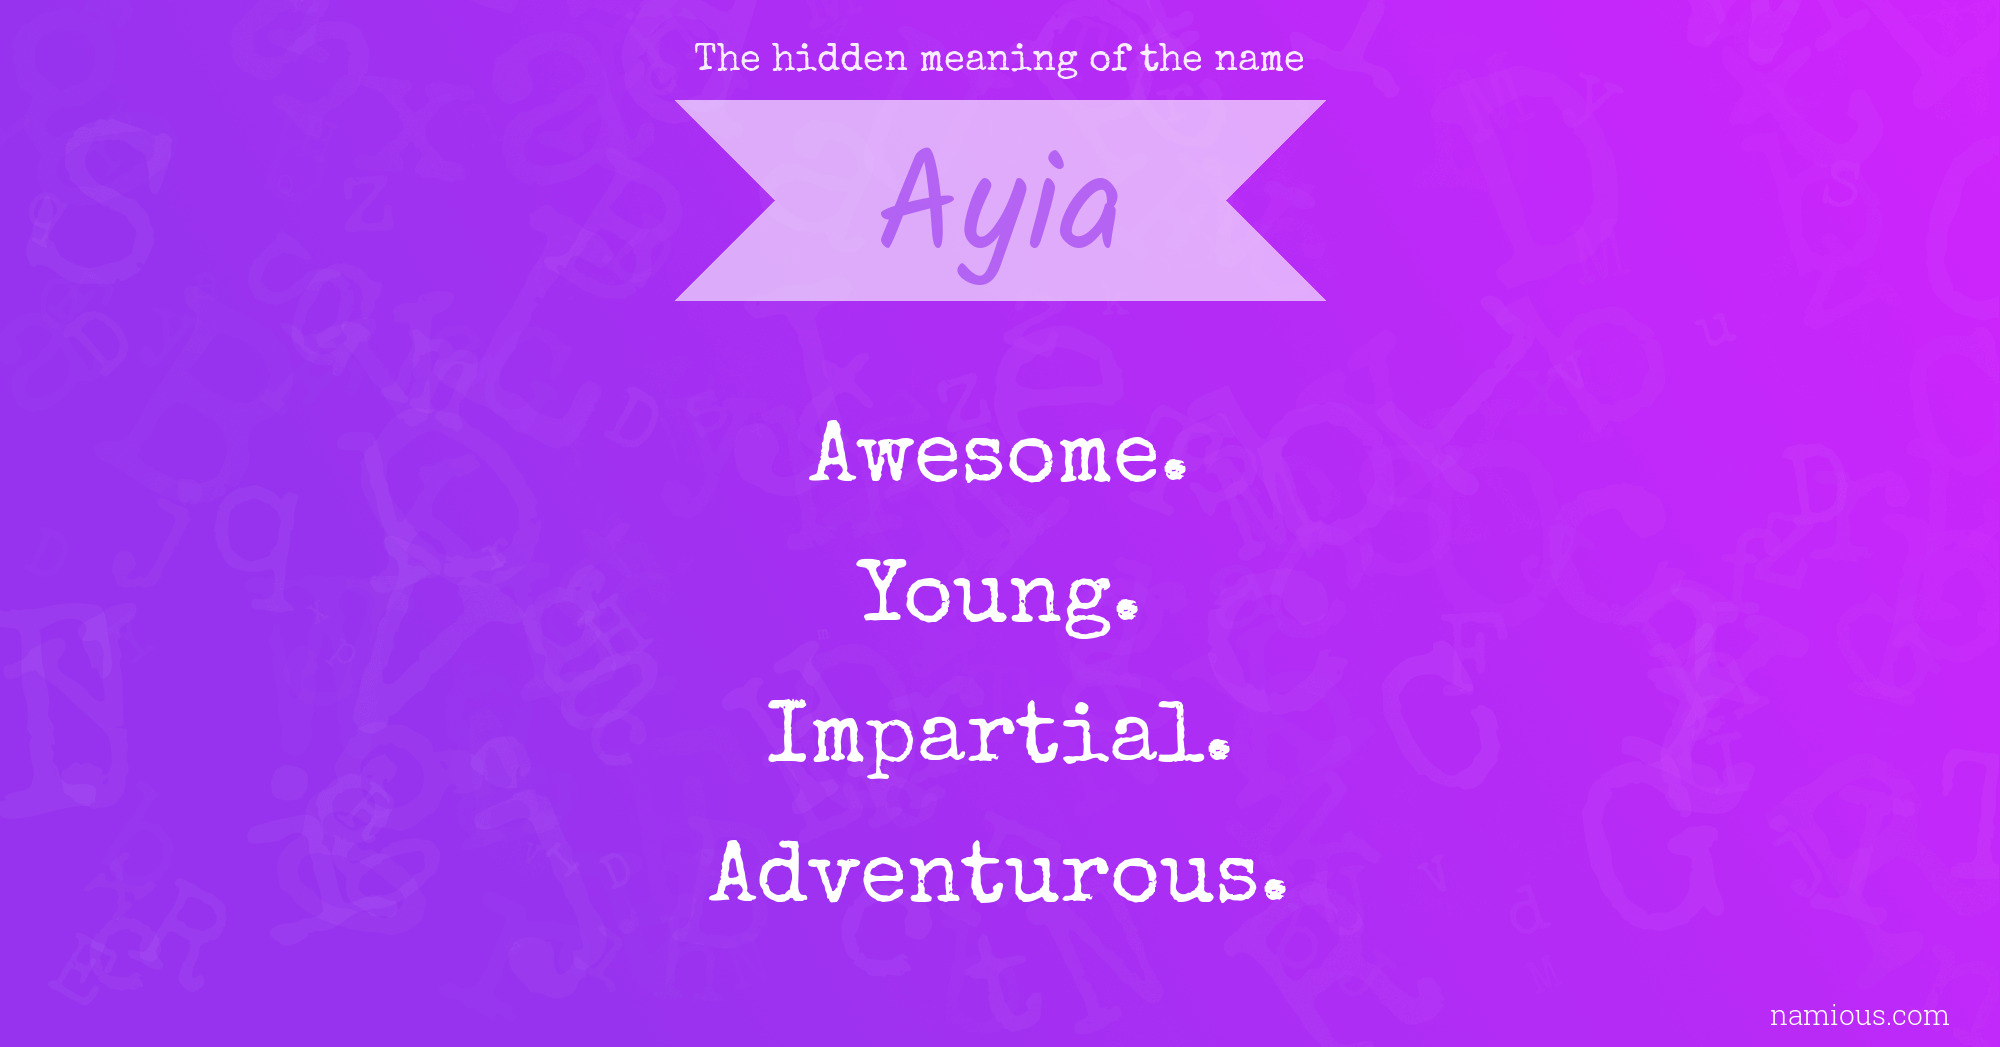 the-hidden-meaning-of-the-name-ayia-namious